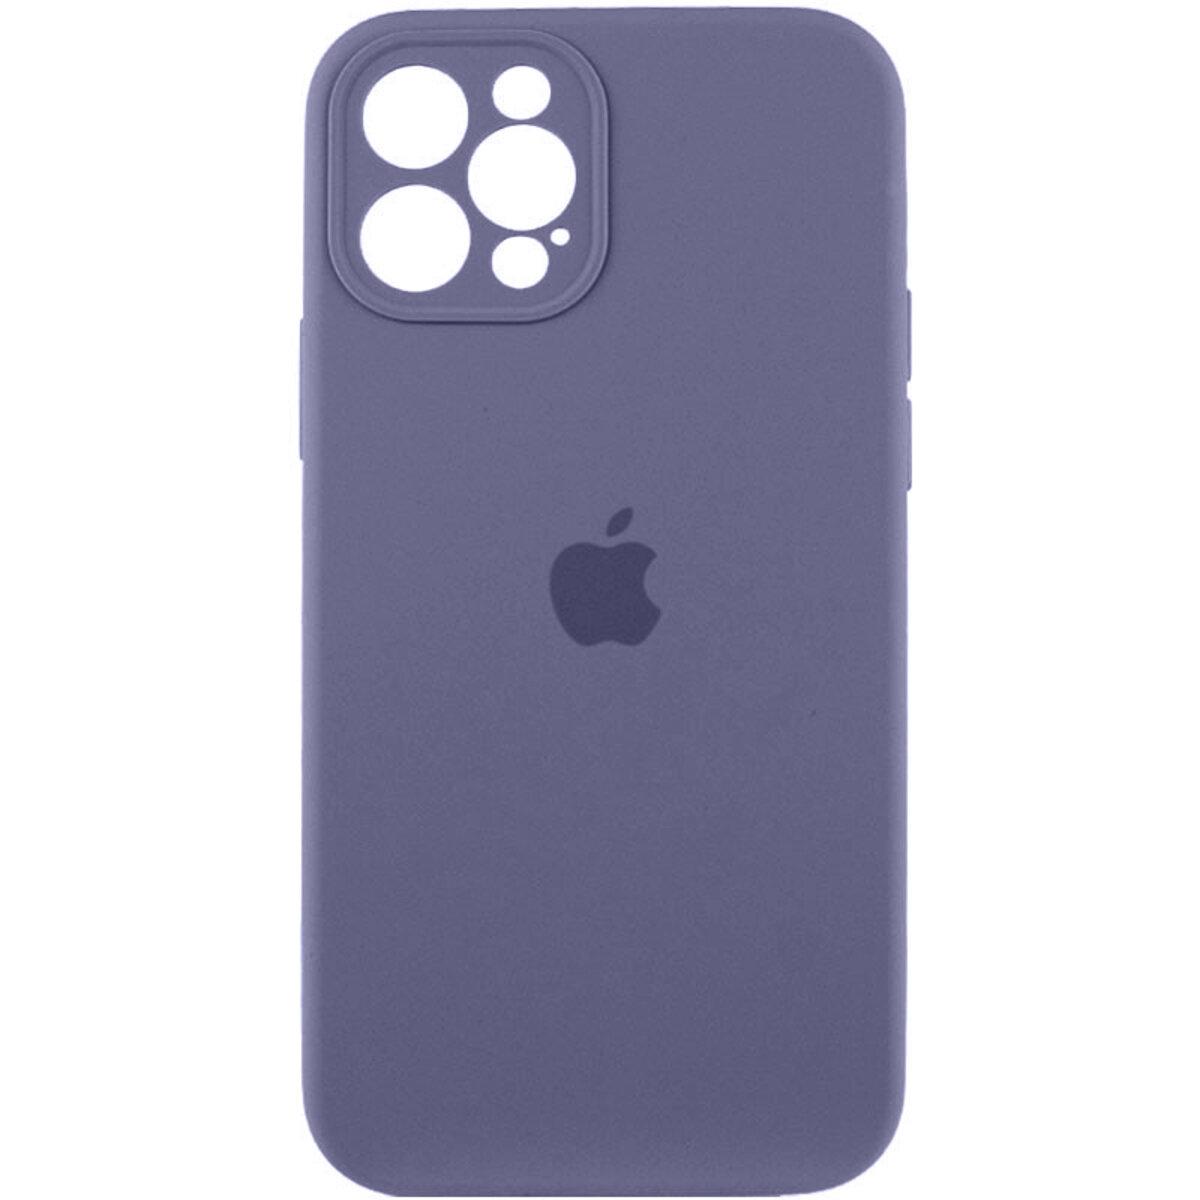 Чохол для смартфона Silicone Full Case AA Camera Protect for Apple iPhone 11 Pro кругл 28,Lavender Grey